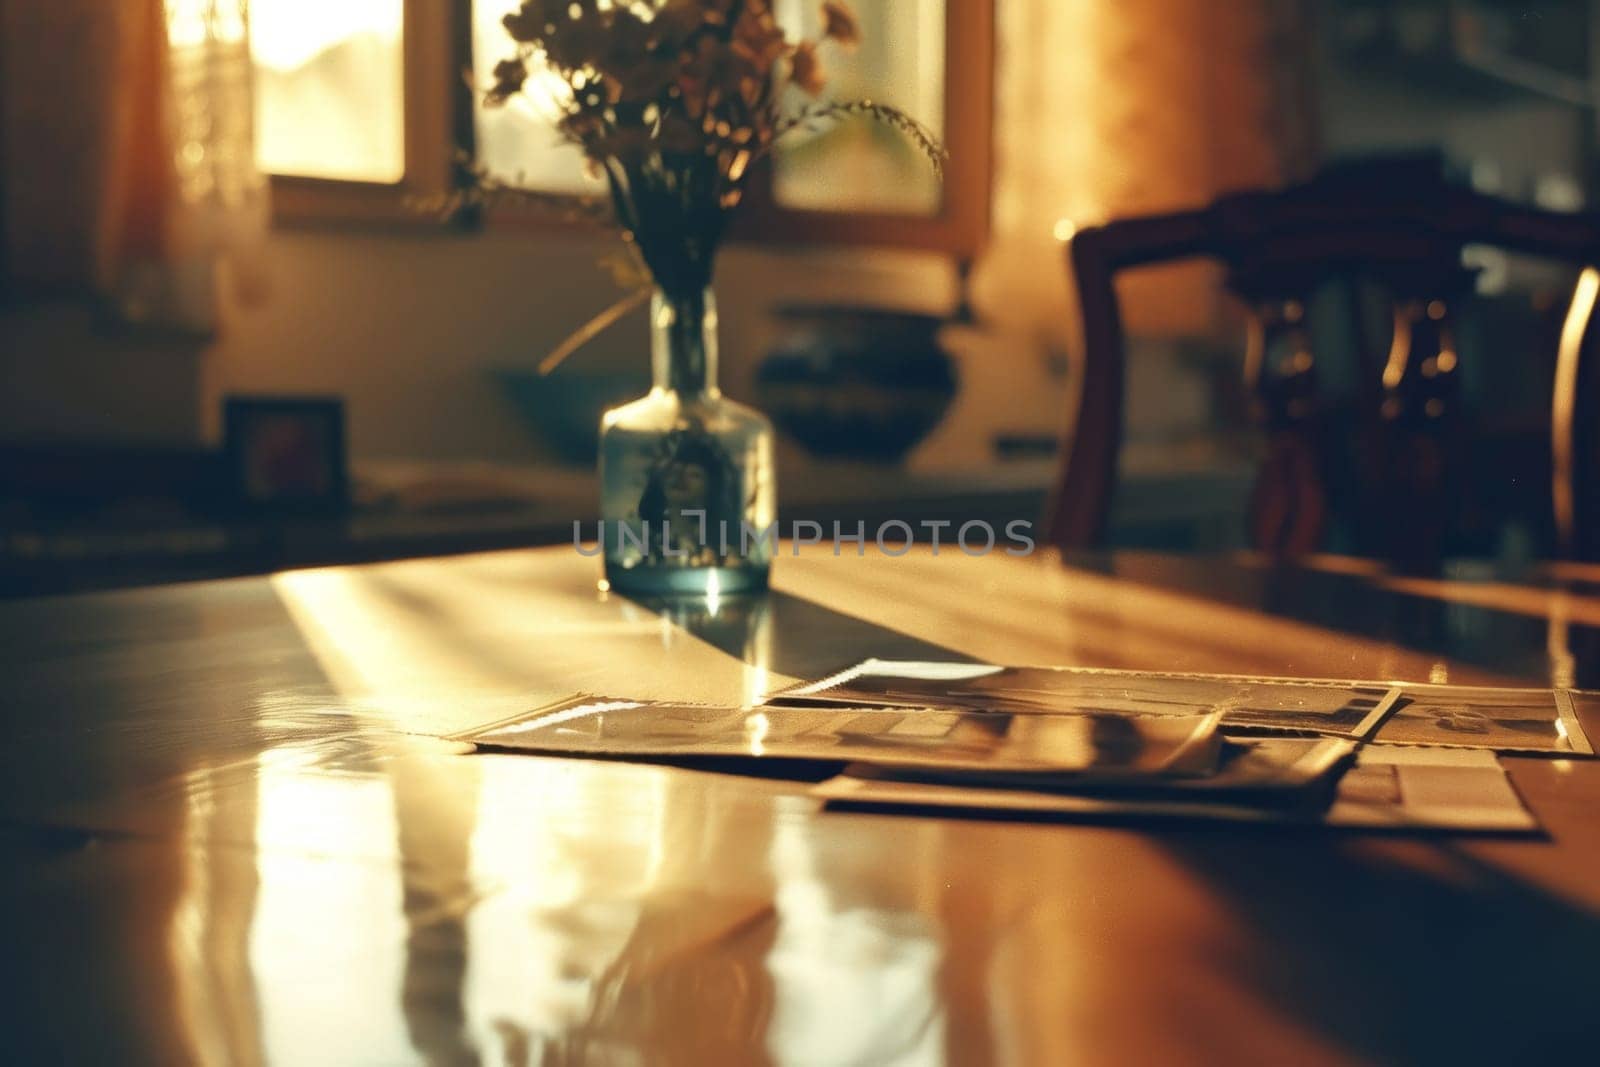 A nostalgic scene with vintage photographs spread on a table, bathed in the warm, golden light of a setting sun peeking through a cozy room's window.